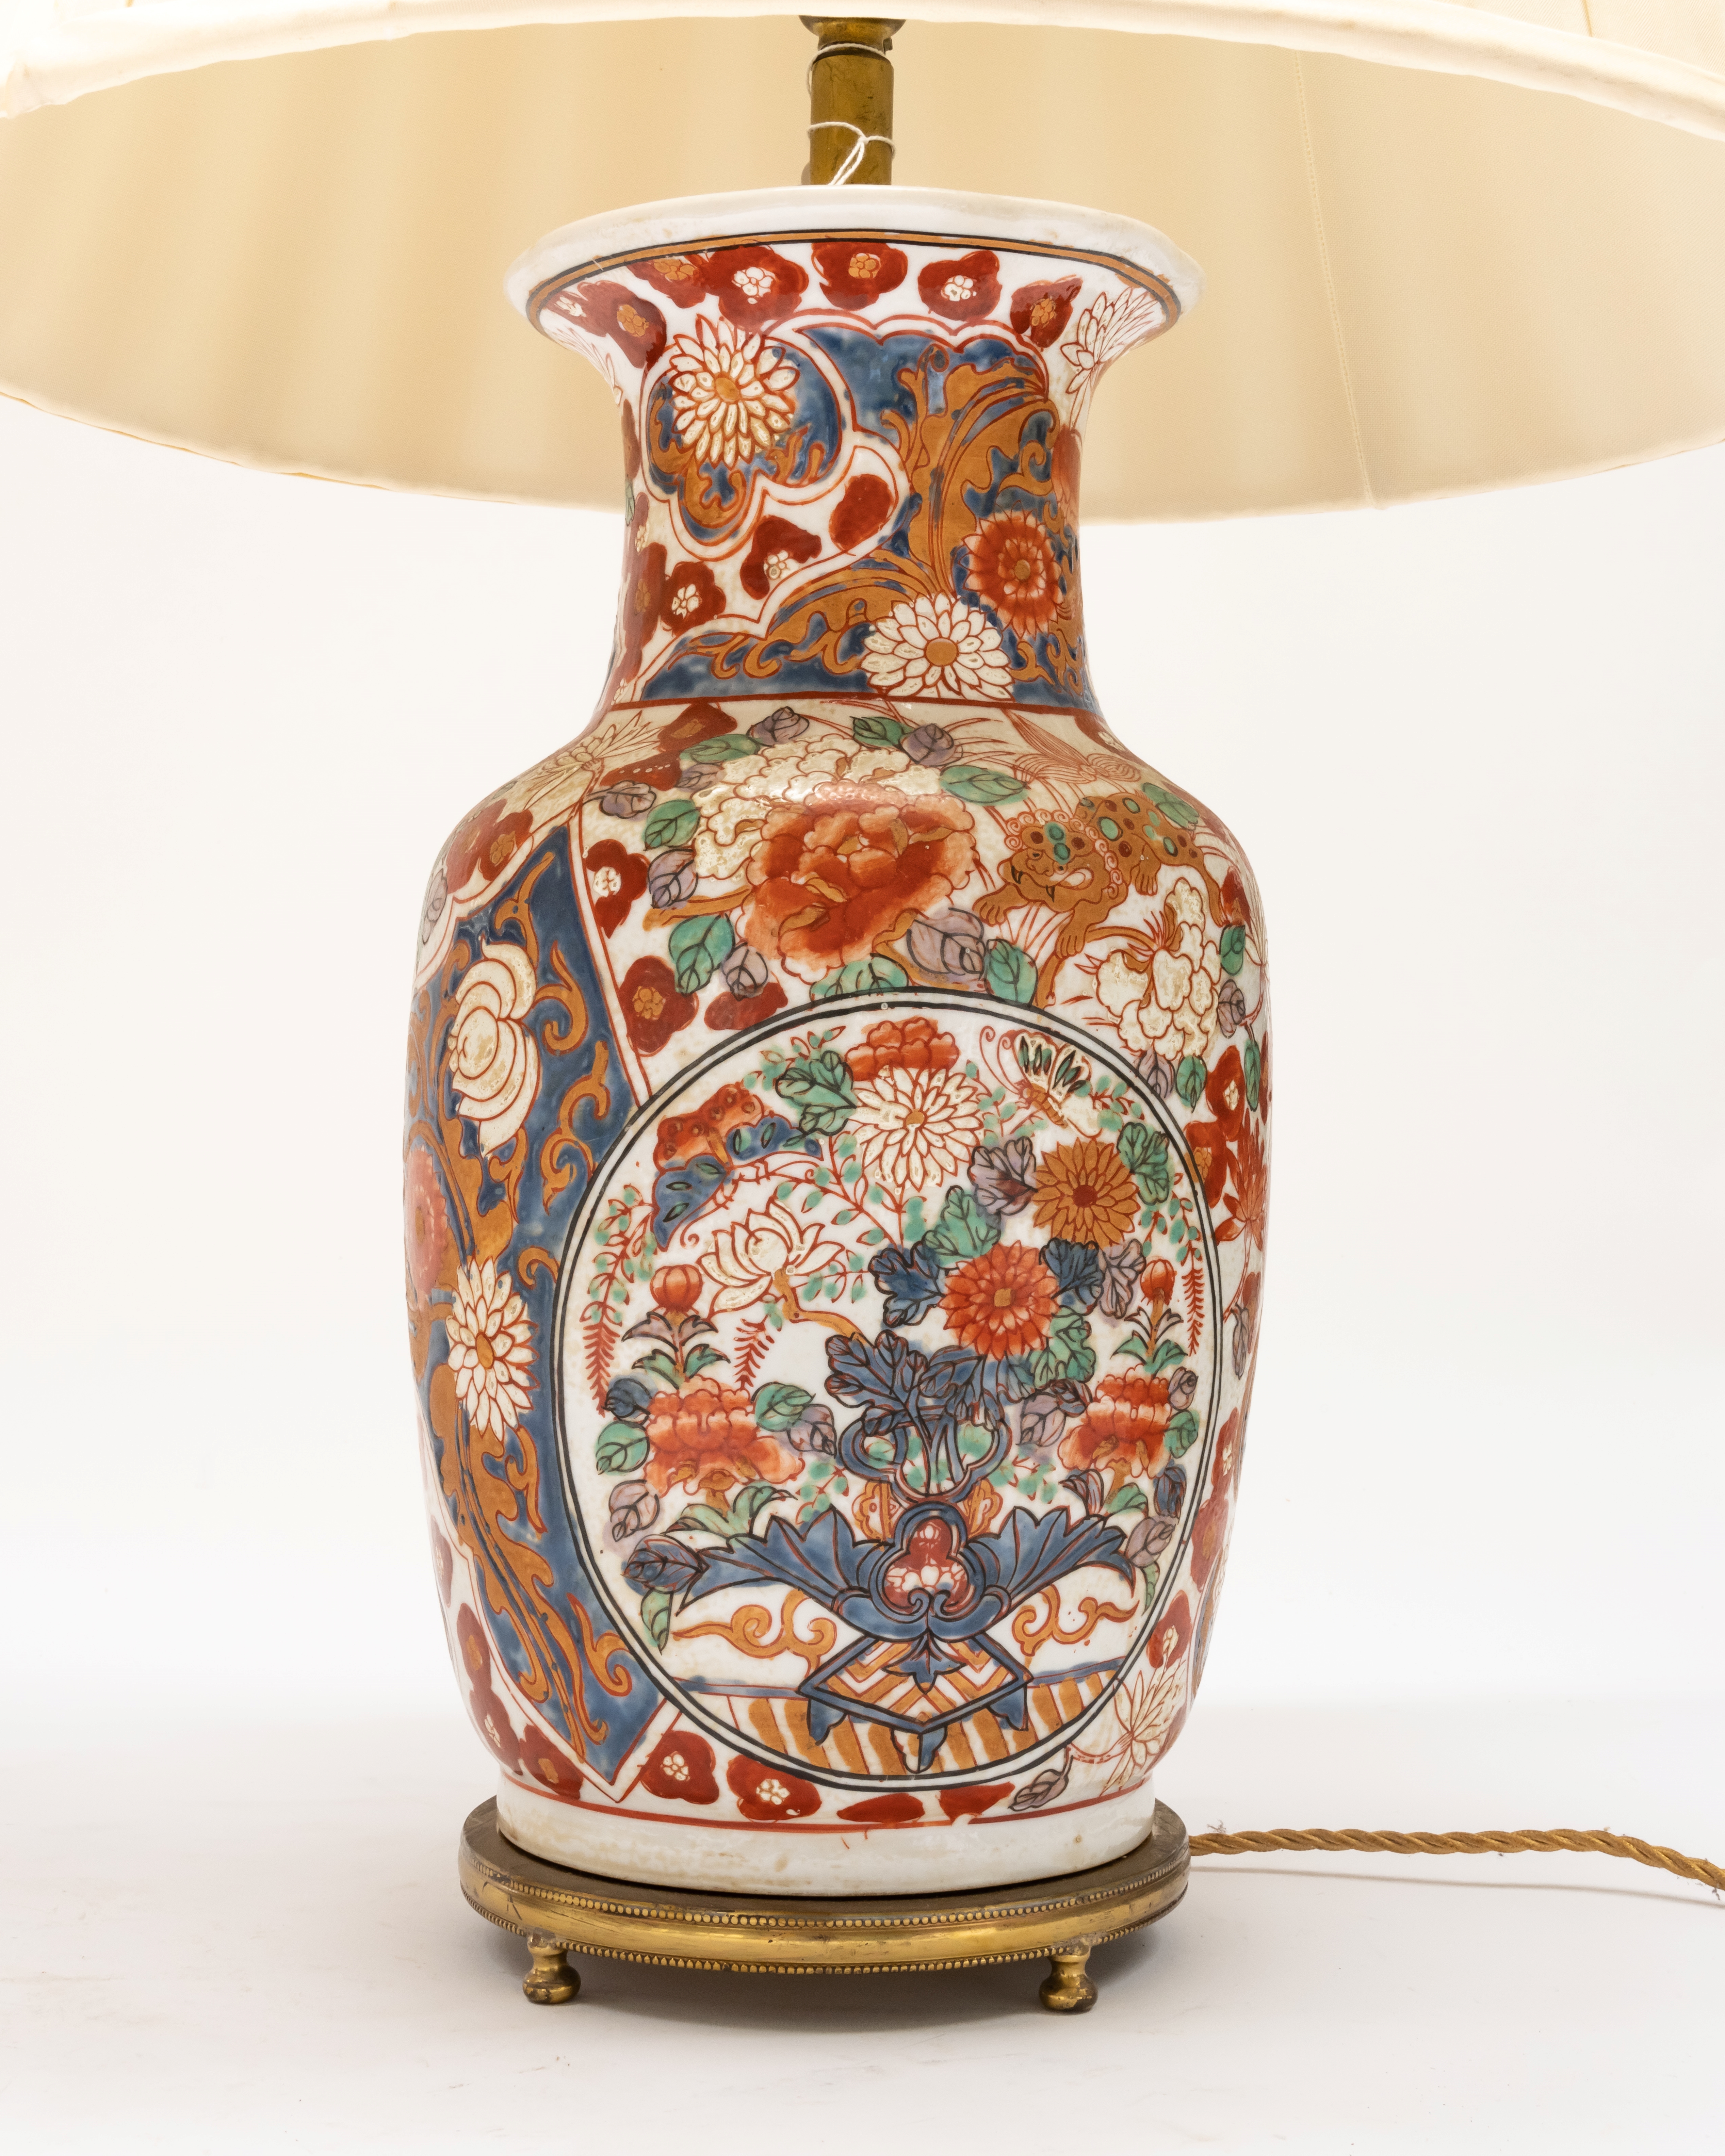 A PAIR OF IMARI STYLE PORCELAIN BALUSTER TABLE LAMPS - Image 4 of 6